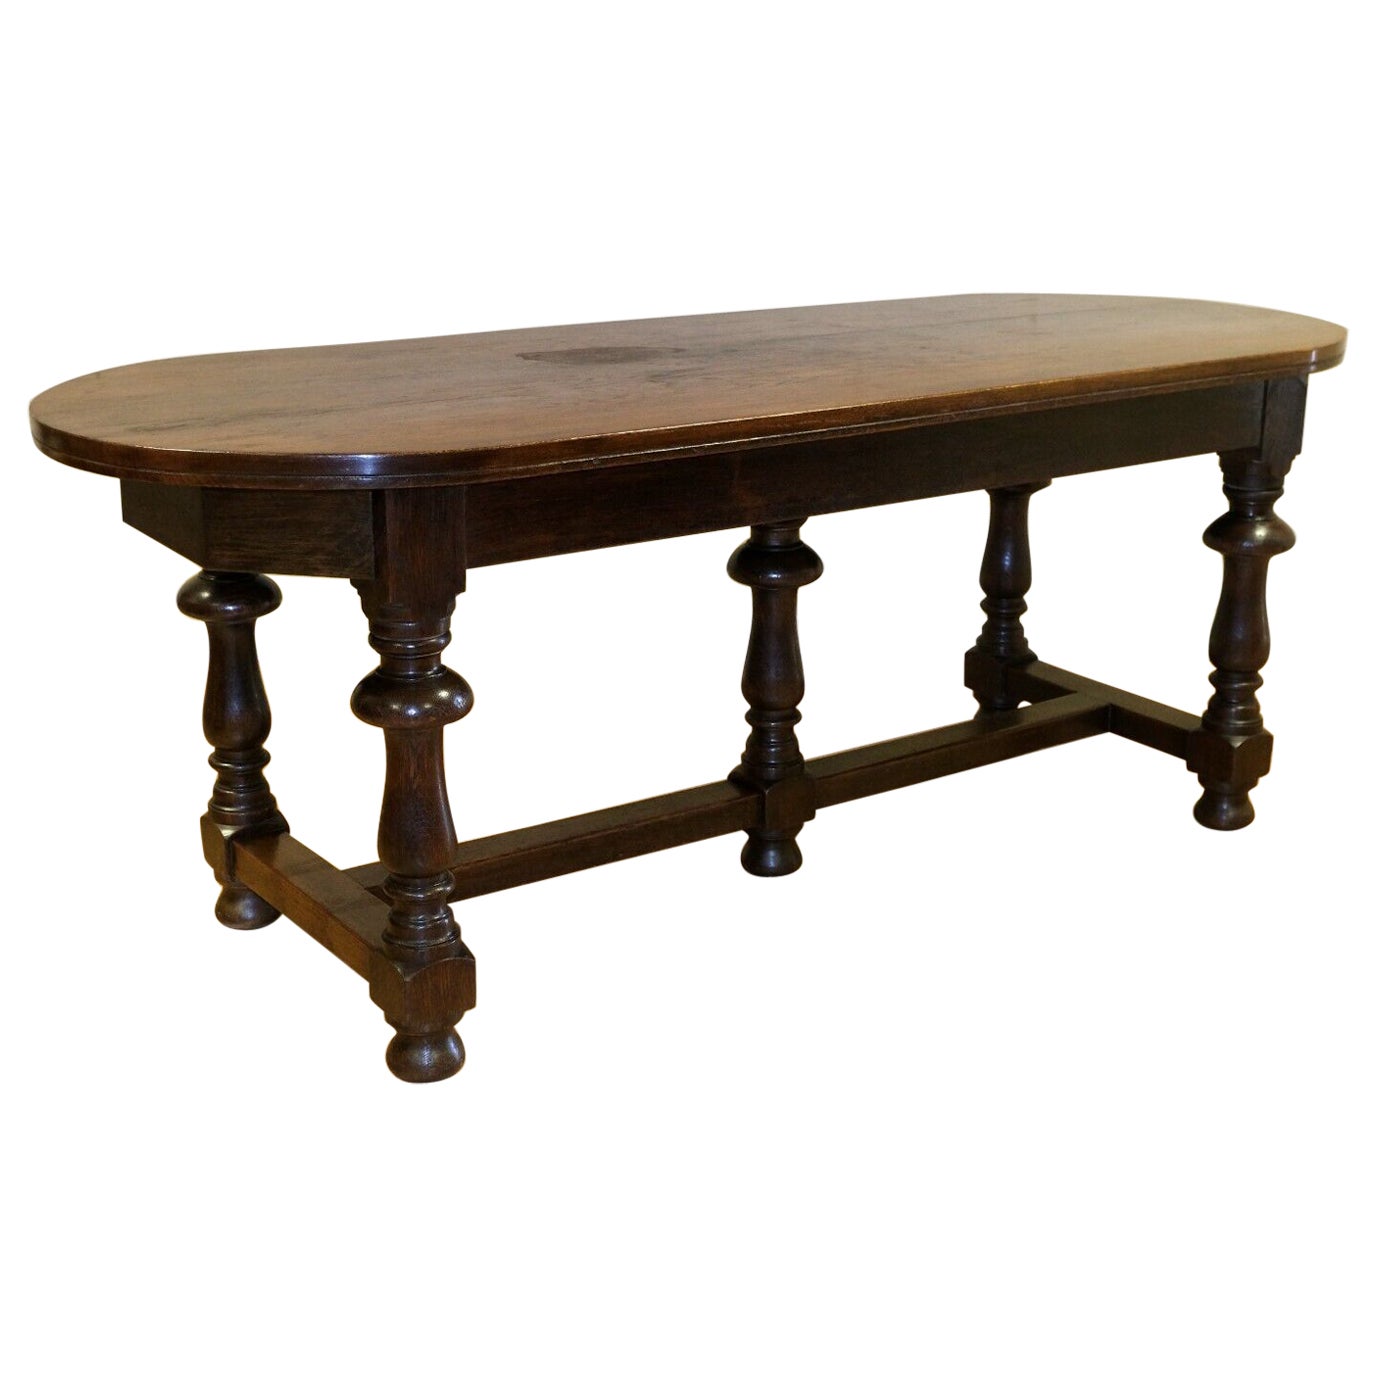 Gorgeous 19th Century Solid Oak Hall Refectory Dining Table on Thick Turned Legs